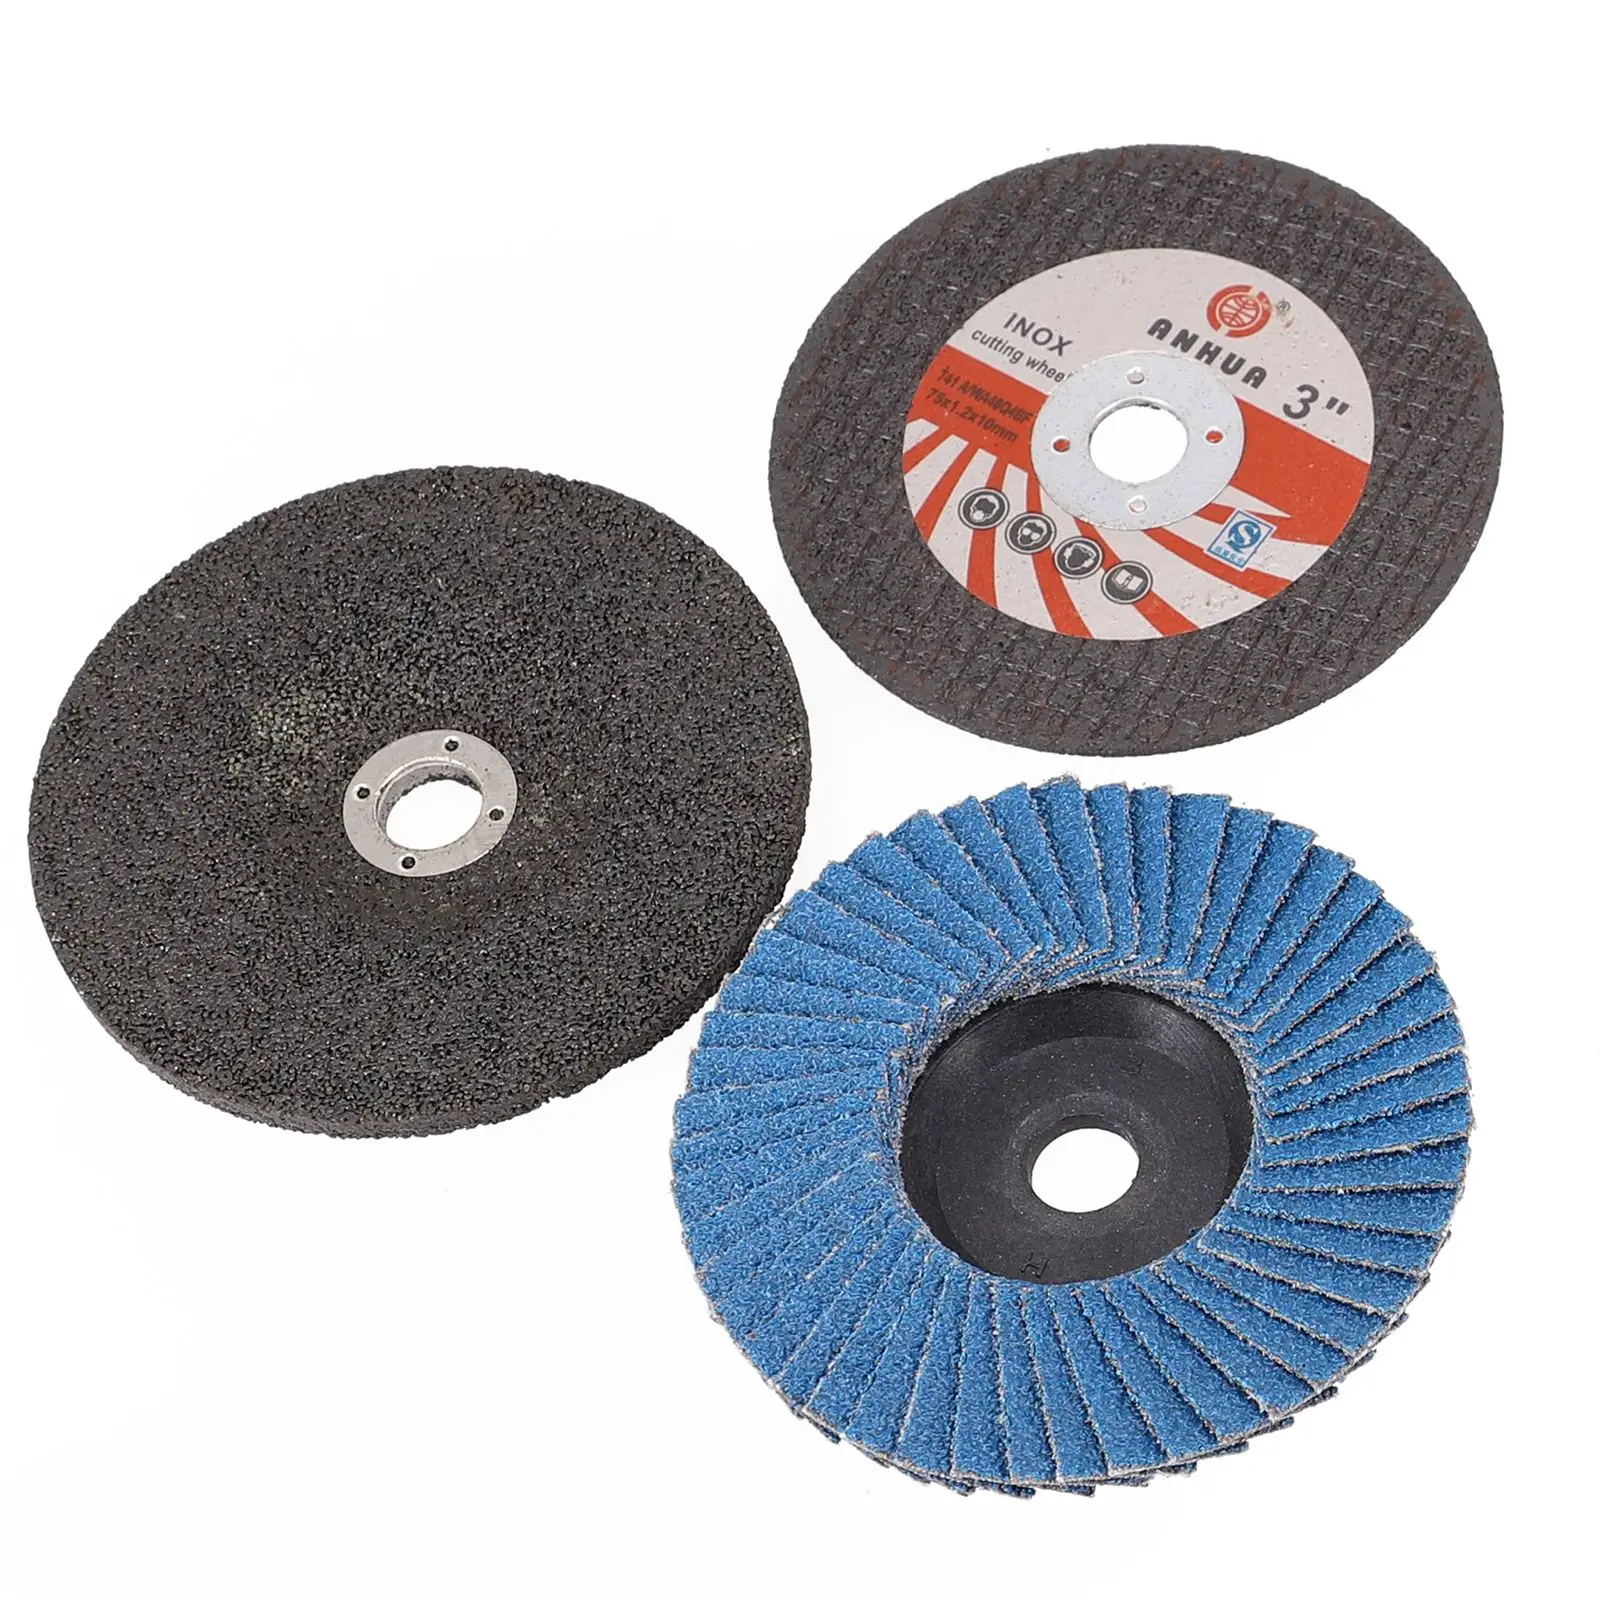 Brand New Cutting Disc Grinding Wheel Circular Saw Blade For Angle Grinder For Ceramic Tile Wood Polishing Disc diamond grinding disc 100mm grinding wheel for glass marble ceramic tile polishing angle grinder saw blade rotary abrasive tools